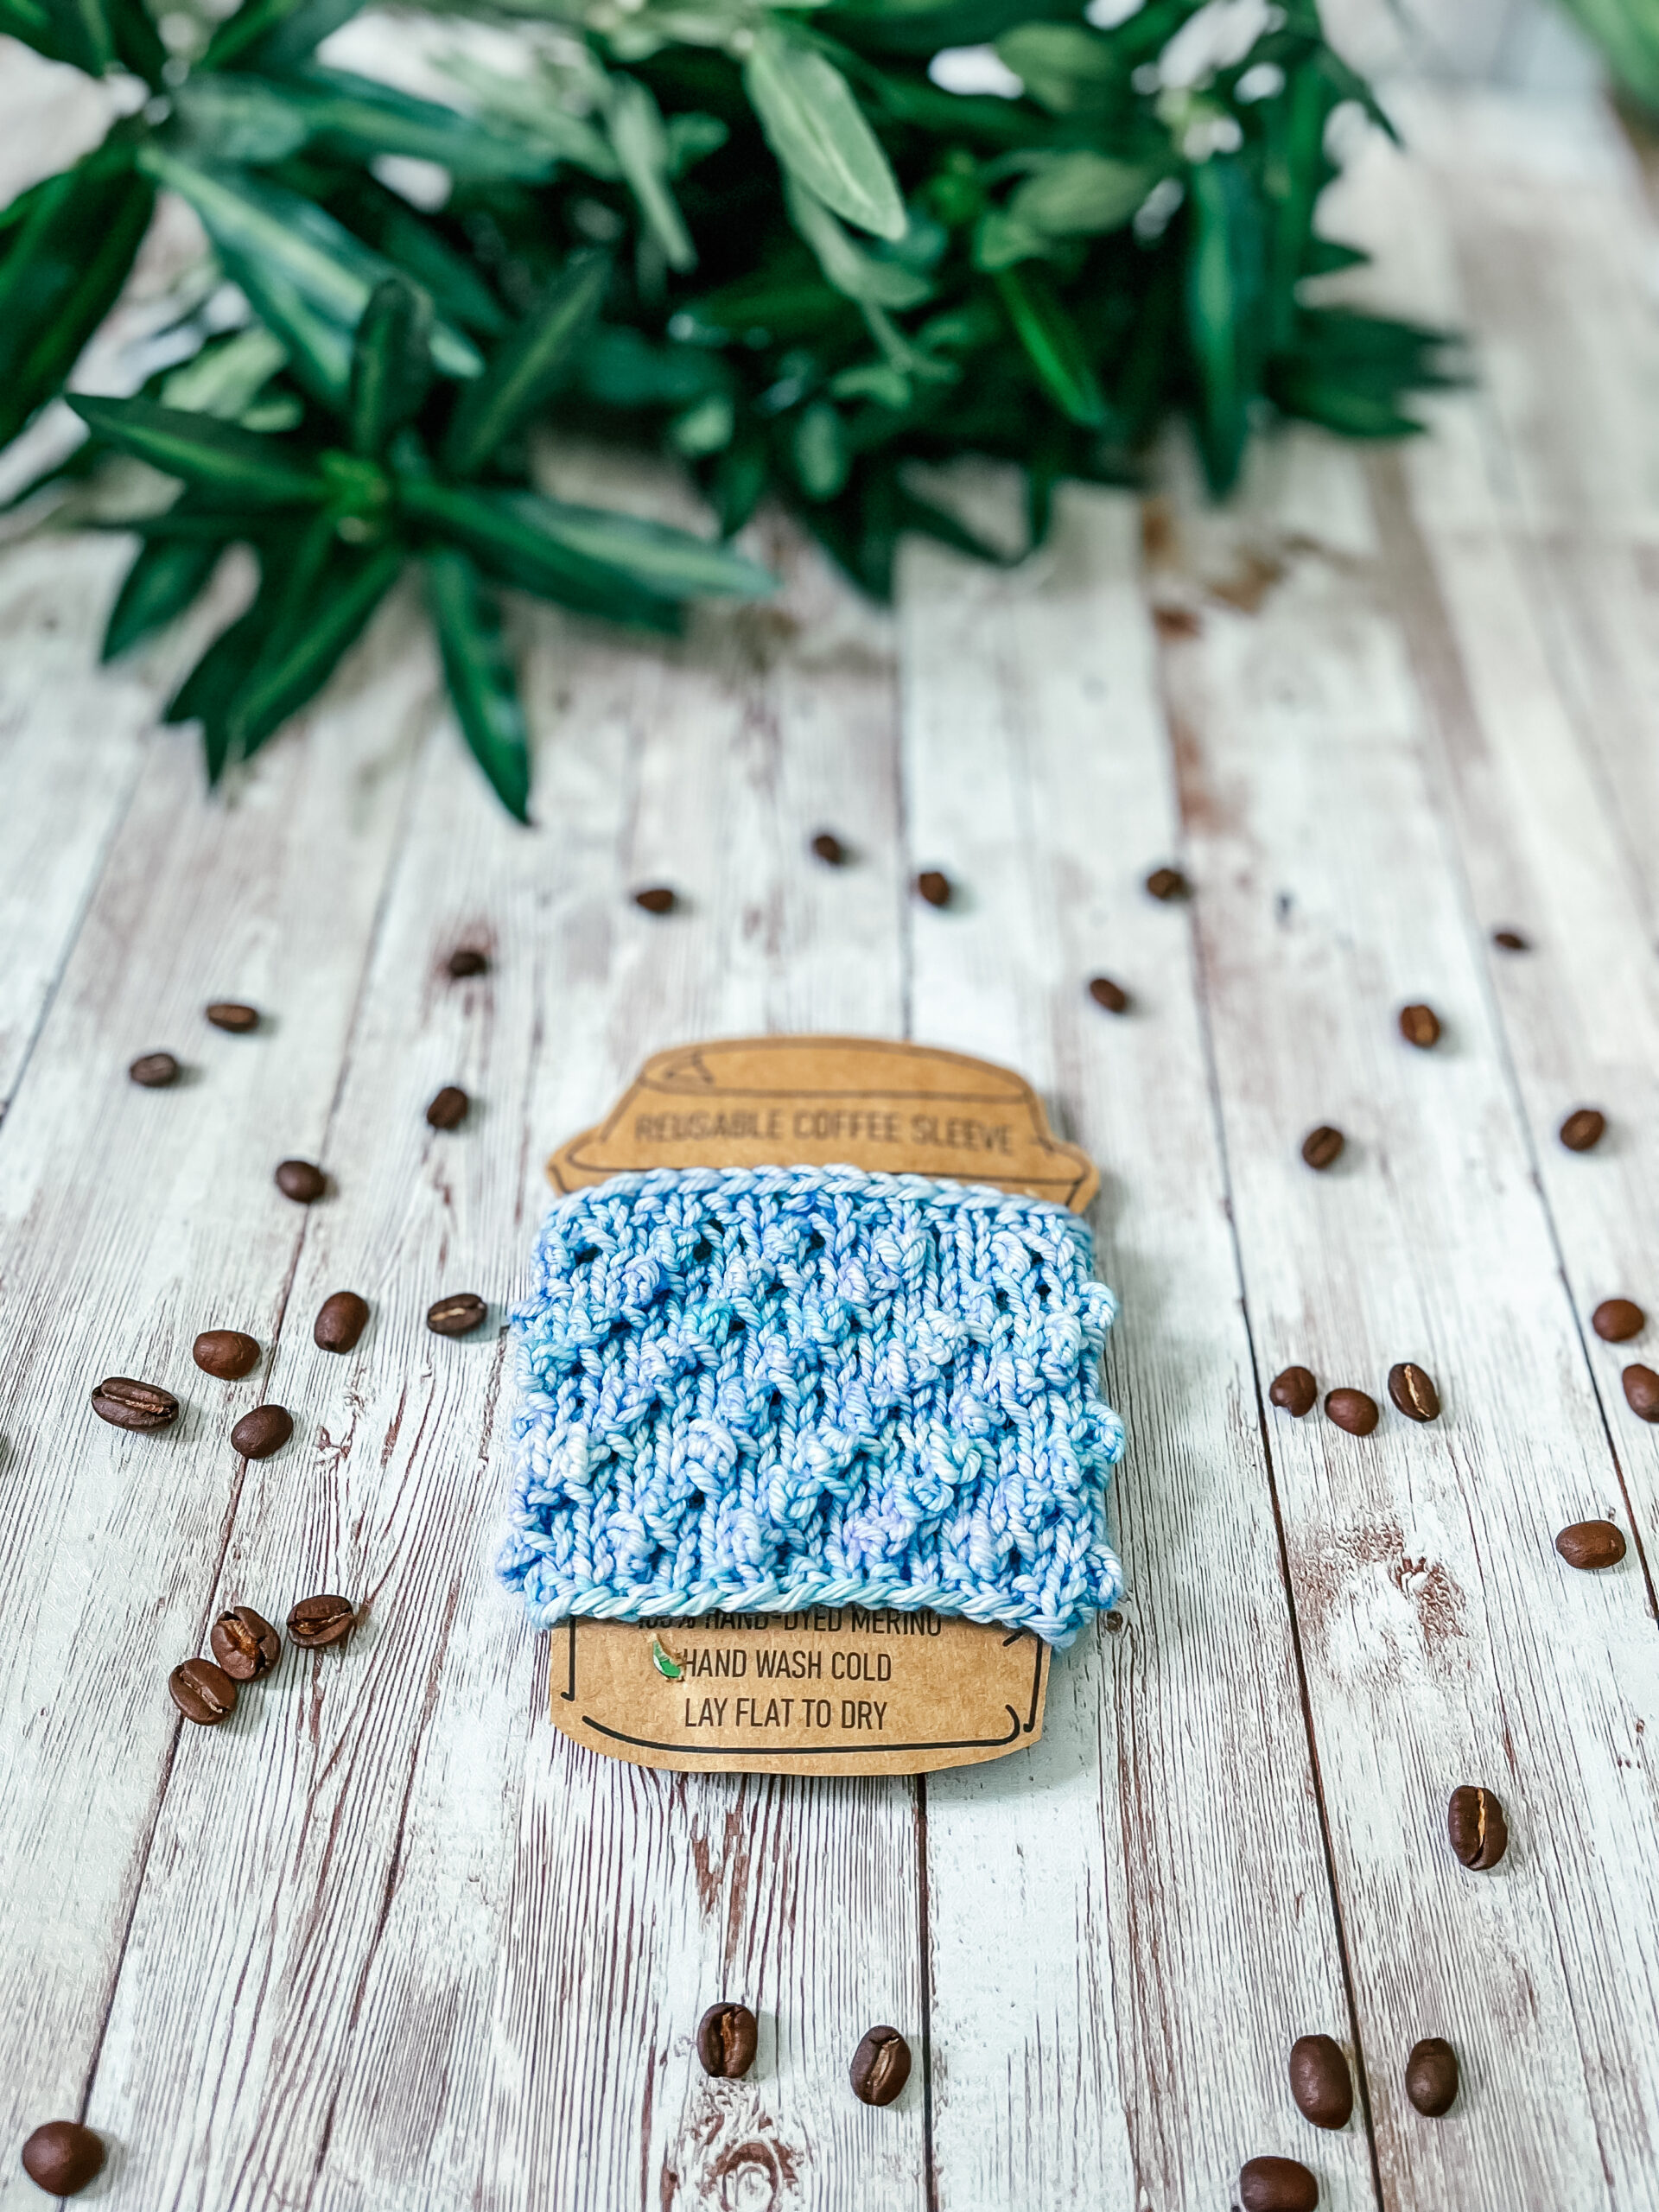 A light blue coffee sleeve is wrapped around a kraft paper image of a coffee cup. It rests on a wood plank, surrounded by scattered coffee beans and greenery in the background